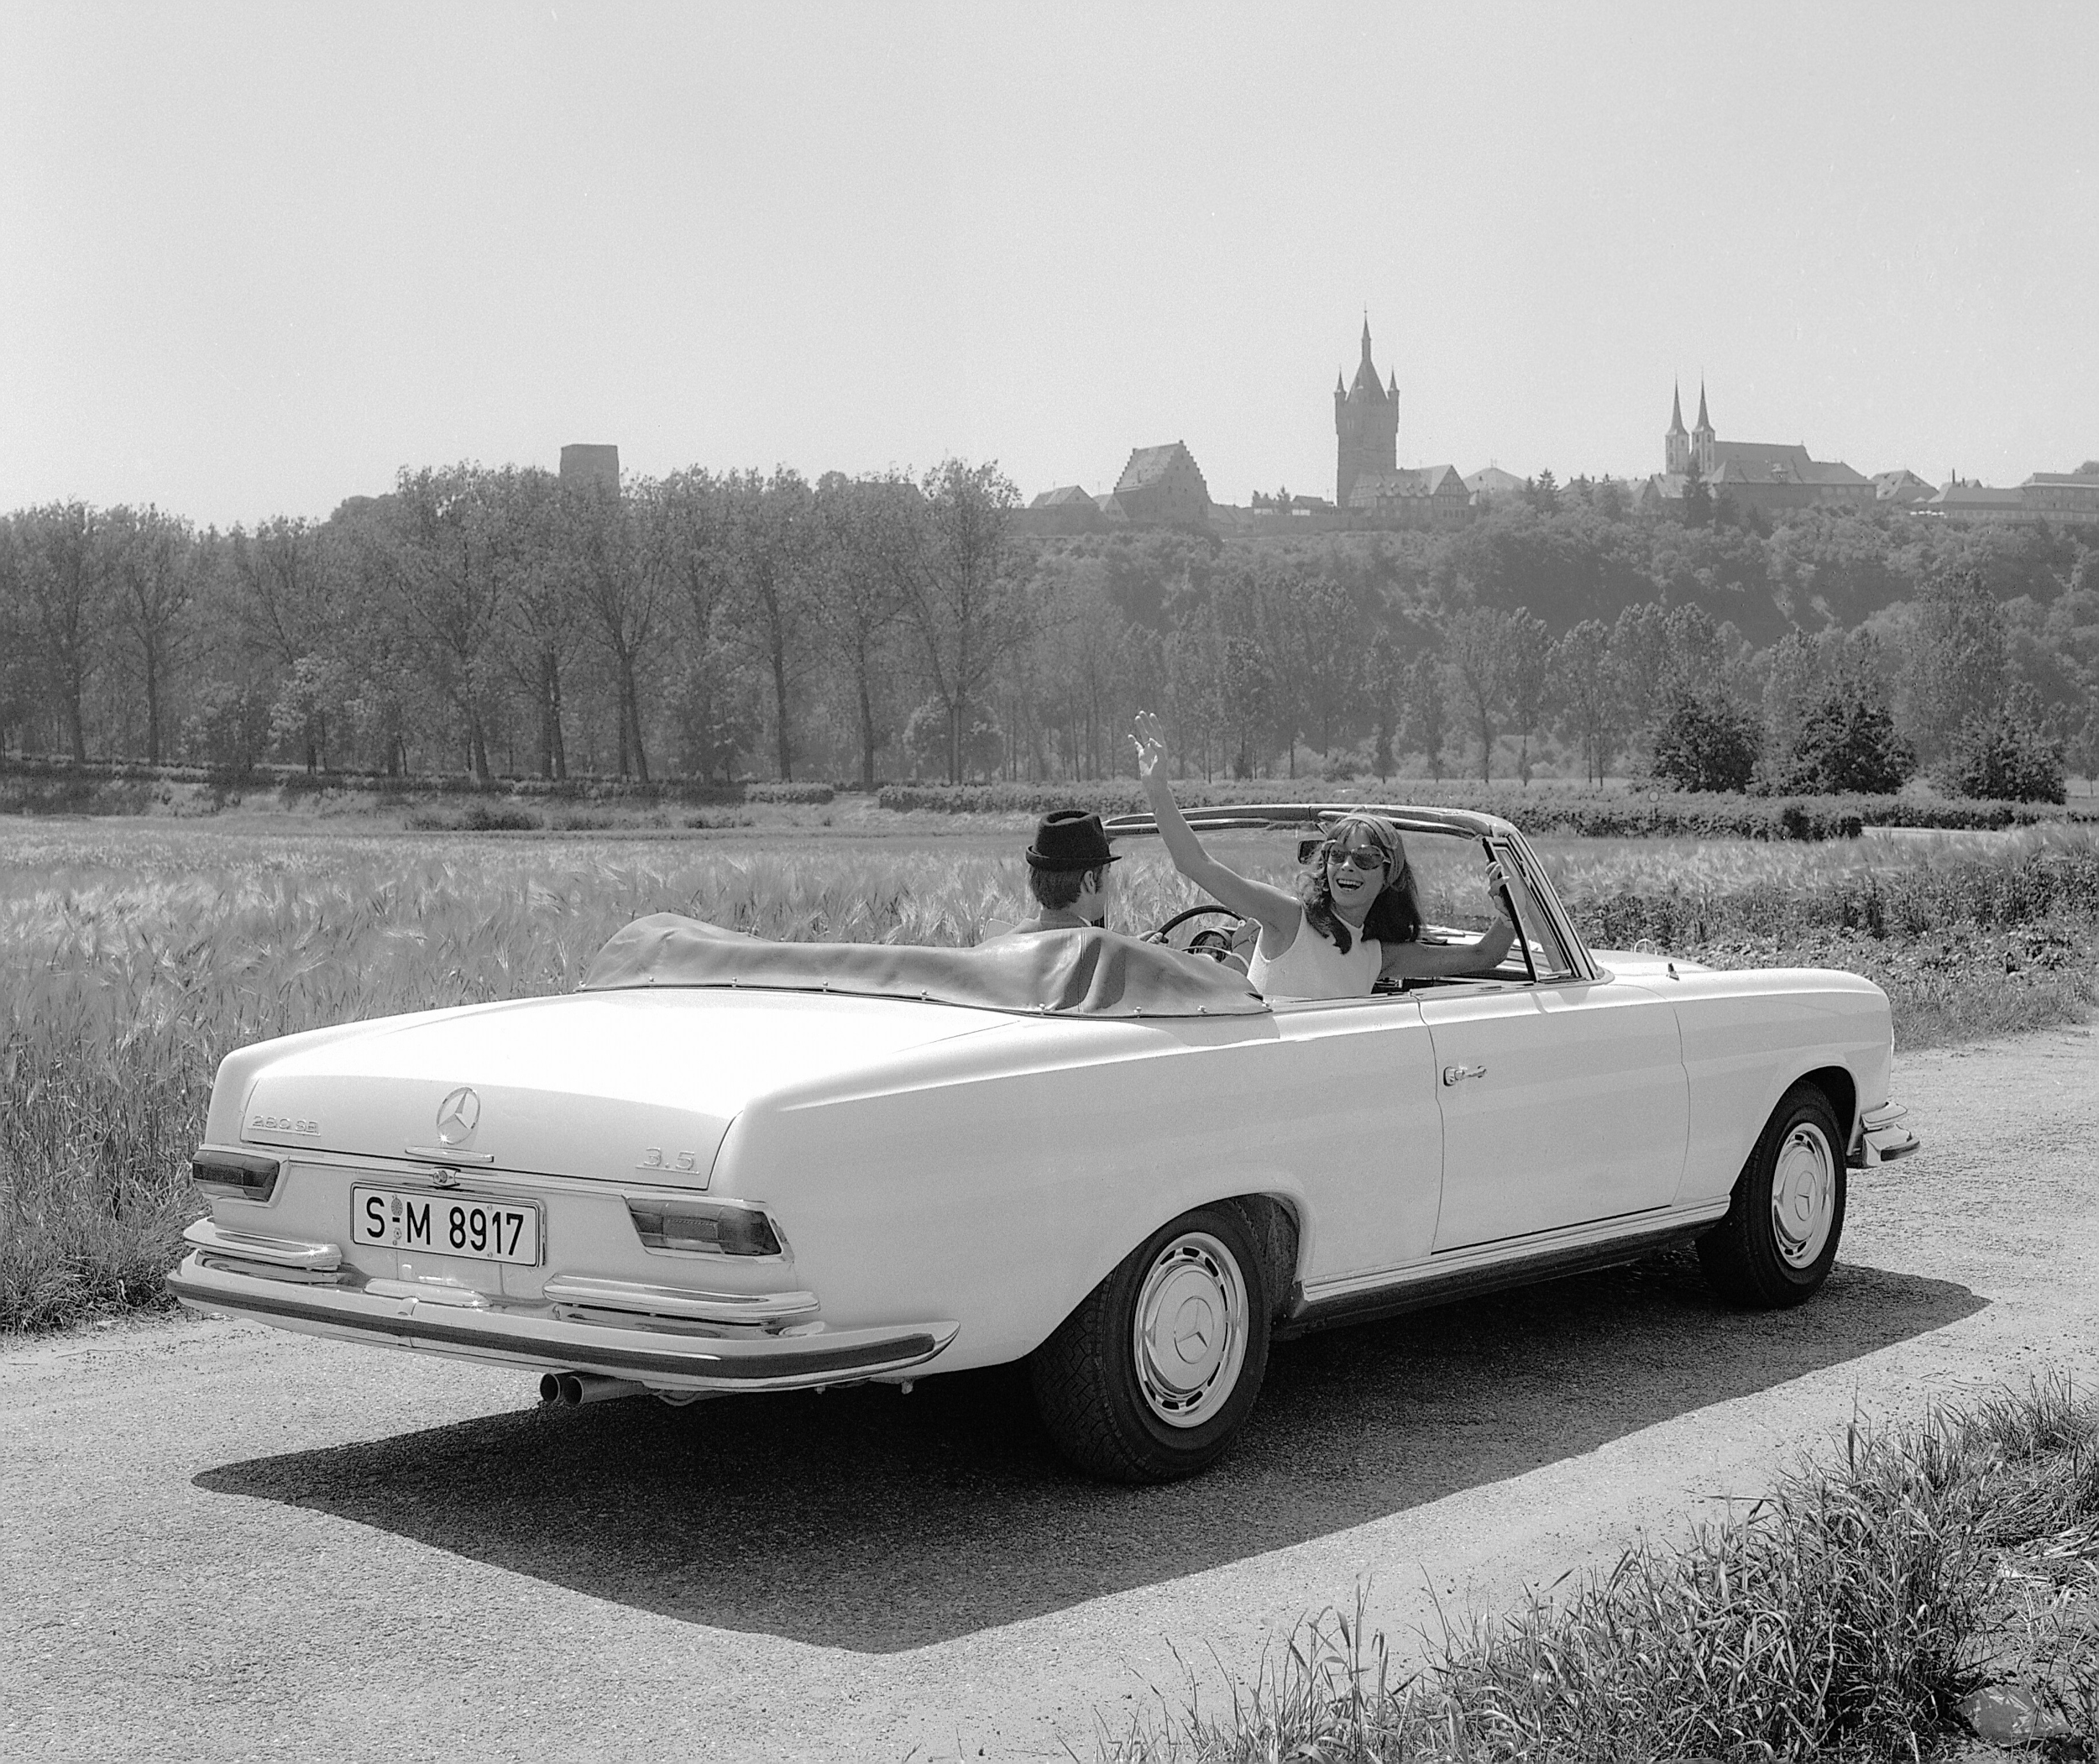 Mercedes-Benz 280 SE 3.5 Cabriolet (model series W 111) with the V8 M 116 engine. Photo from the premiere year in 1969, taken in front of the historic town of Bad Wimpfen. The cabriolet of the W 111/W 112 model series was built with a range of different engines from 1961 to 1971. (Photo signature in the Mercedes-Benz Classic archive: 69168-63)